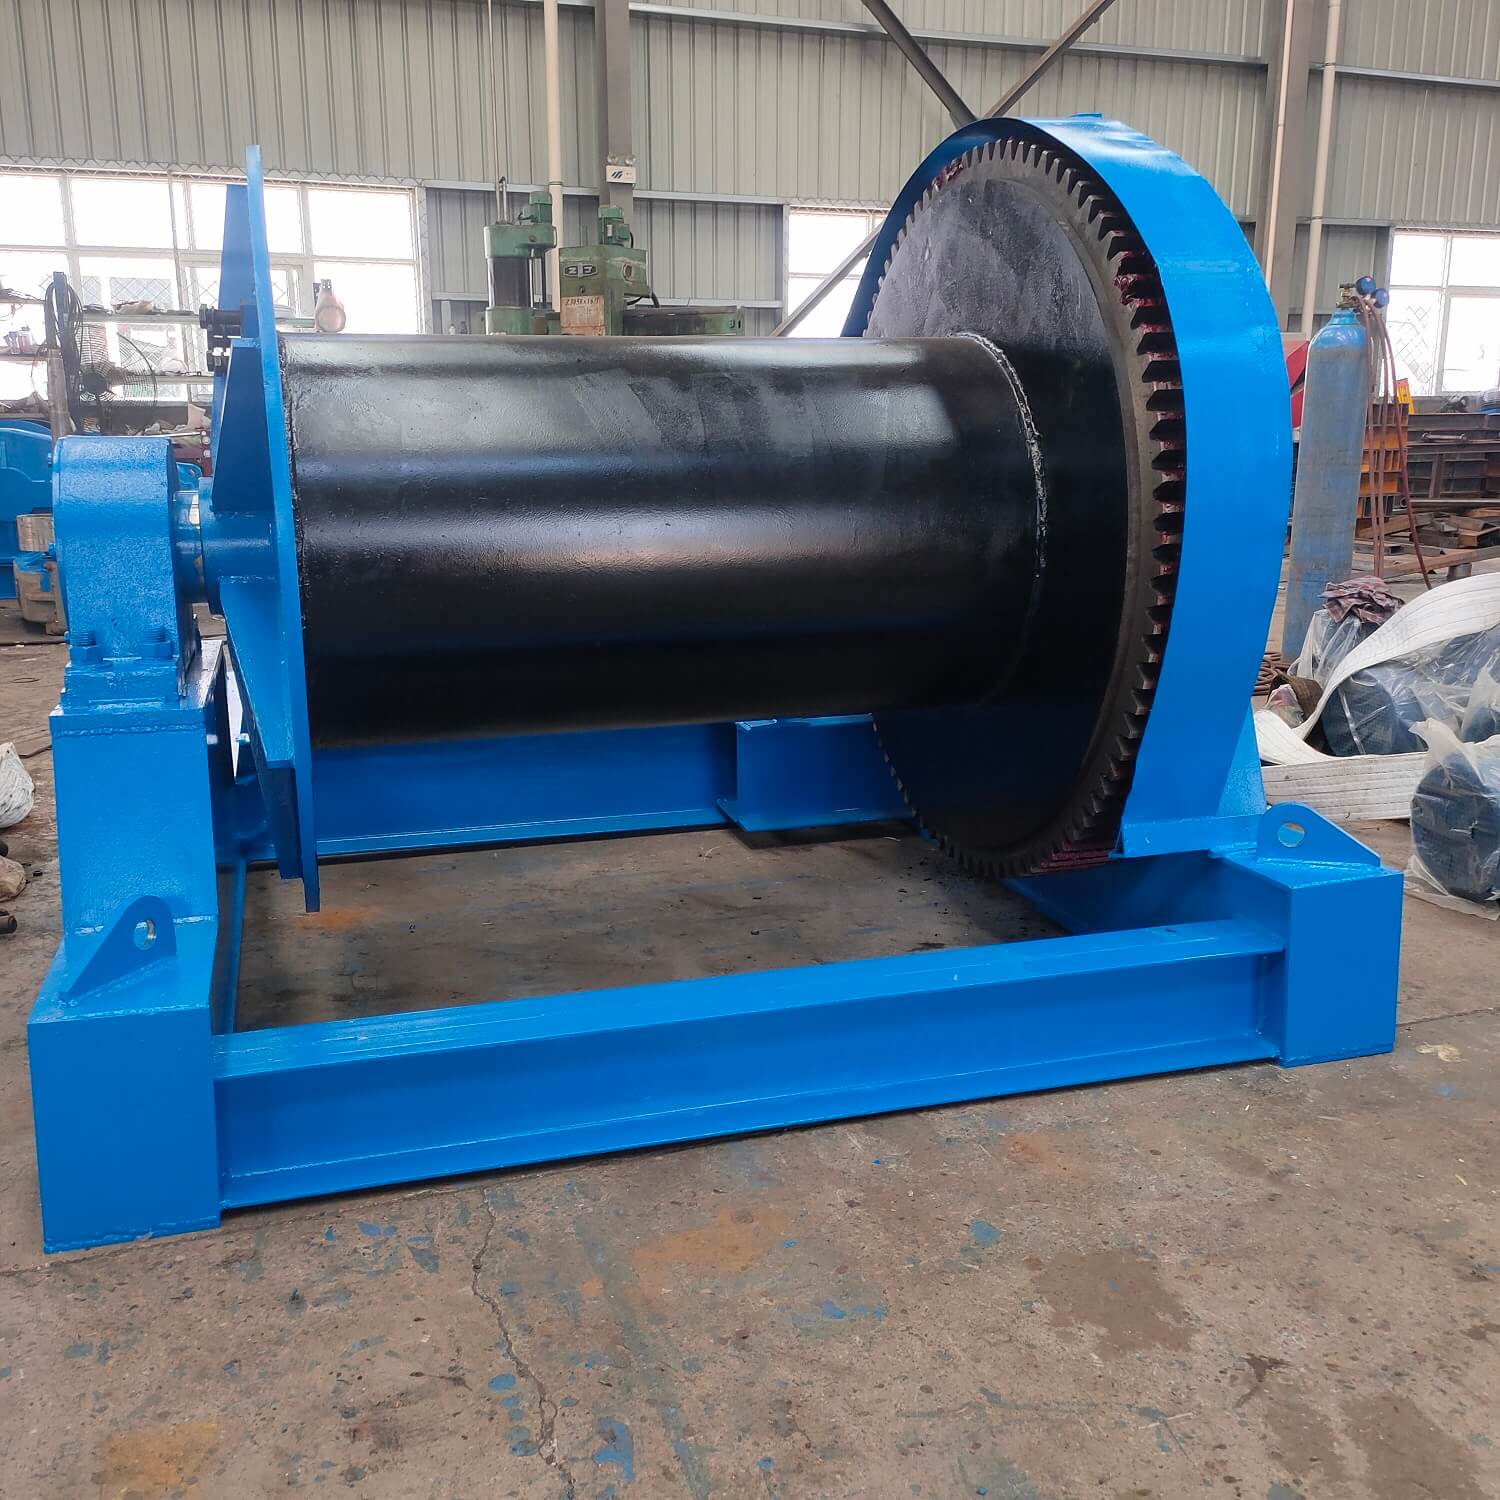 Site photos of 16 ton Building Electric Winch (Pulling cable winch)-4.jpg